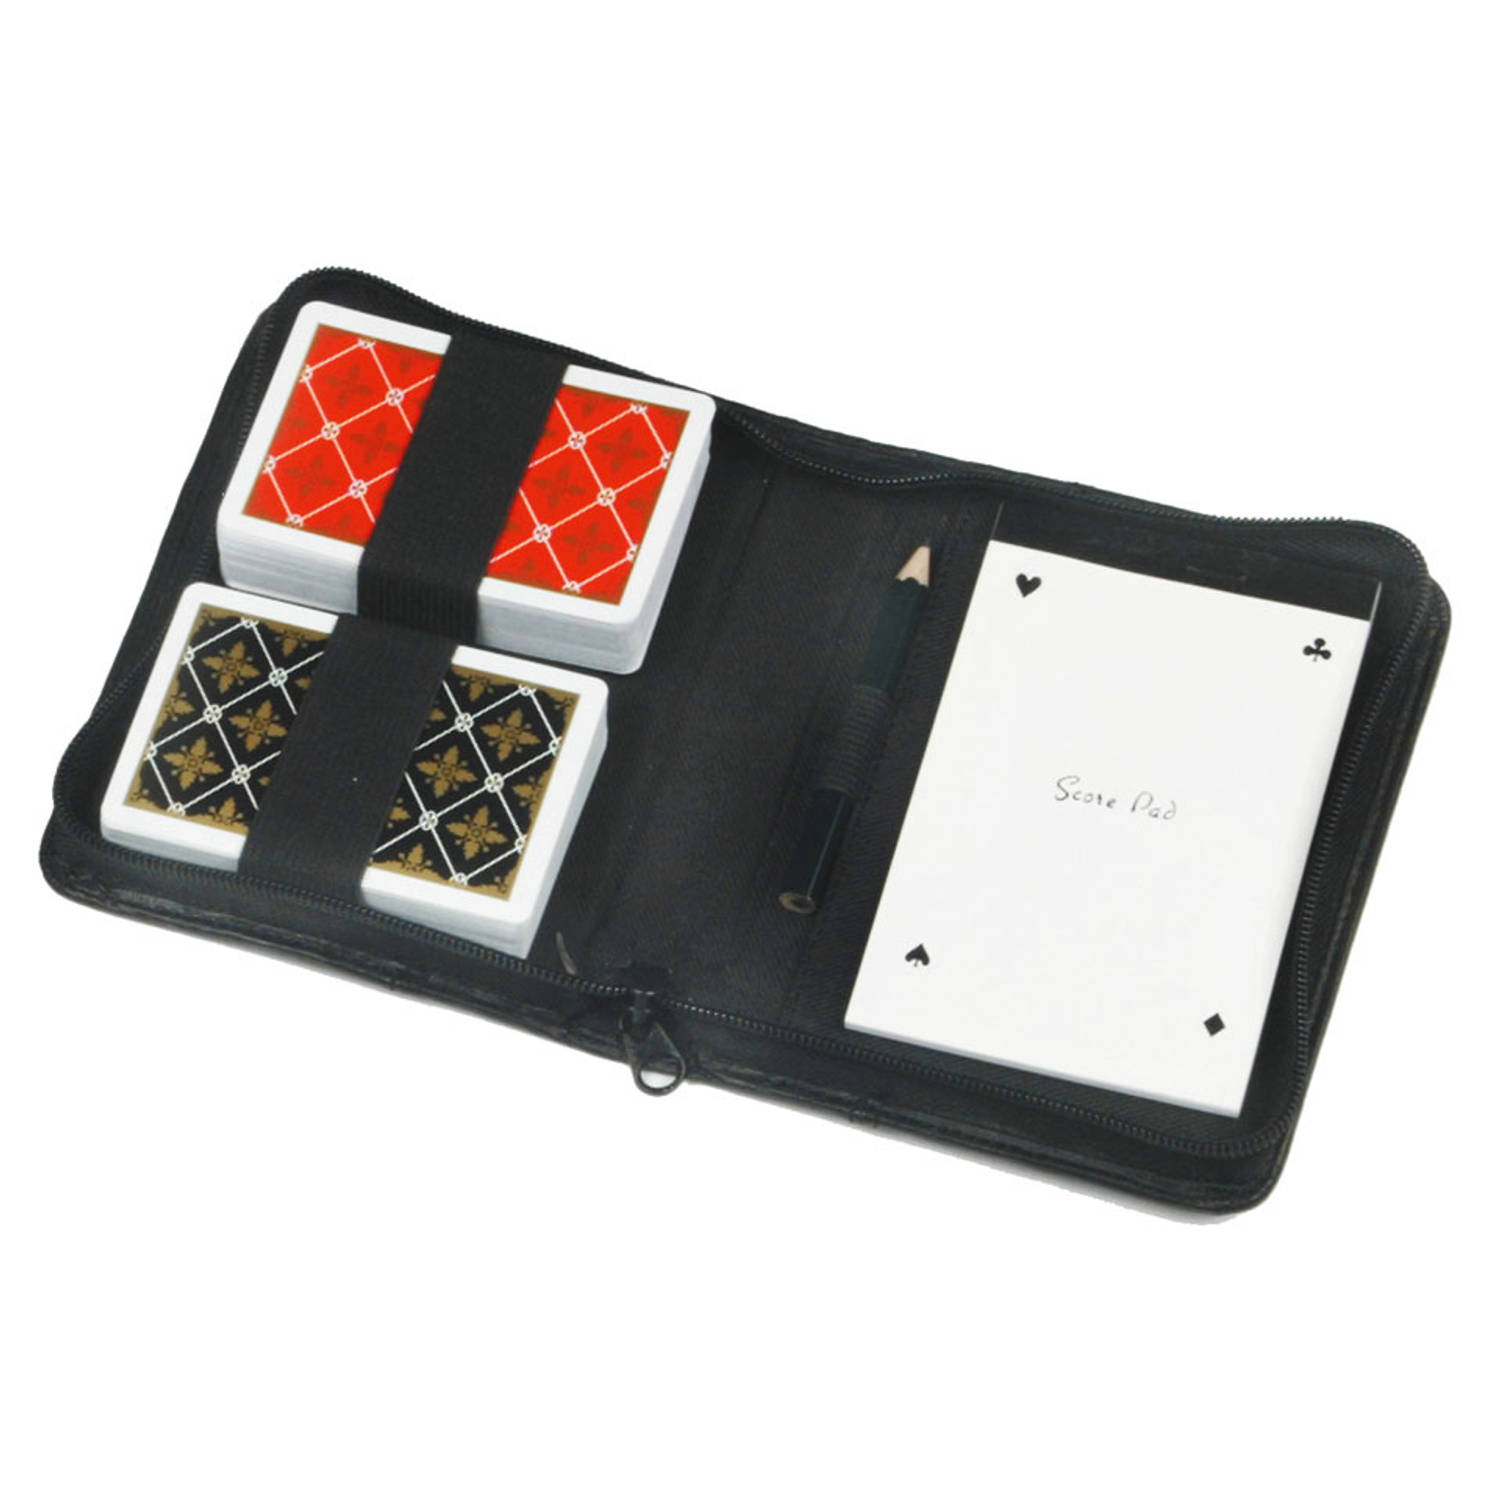 LONGFIELD 2 DECKS PLAYING CARDS NORMAL 4 INDEX IN PU LEATHER CASE WITH PENCIL AND SCOREBLOCK